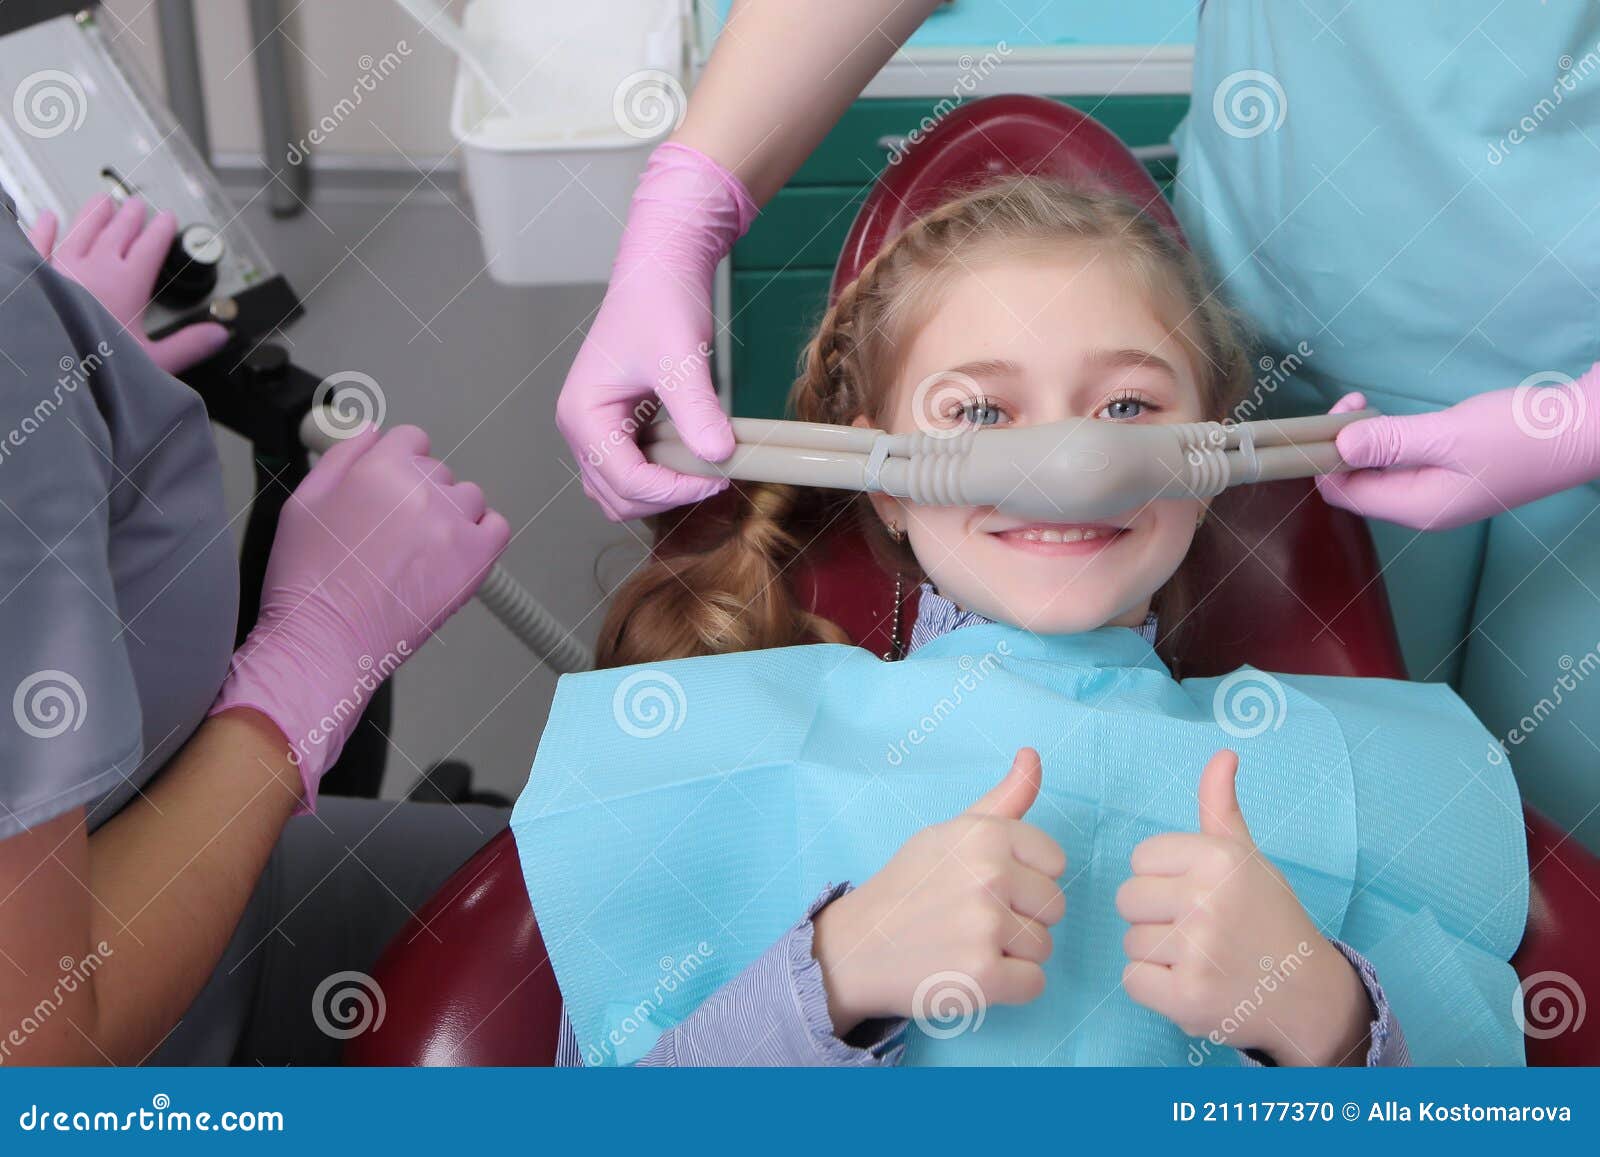 a little girl is comfortable to treat her teeth under superficial sedation. the girl smiles and holds two thumbs up. milk teeth